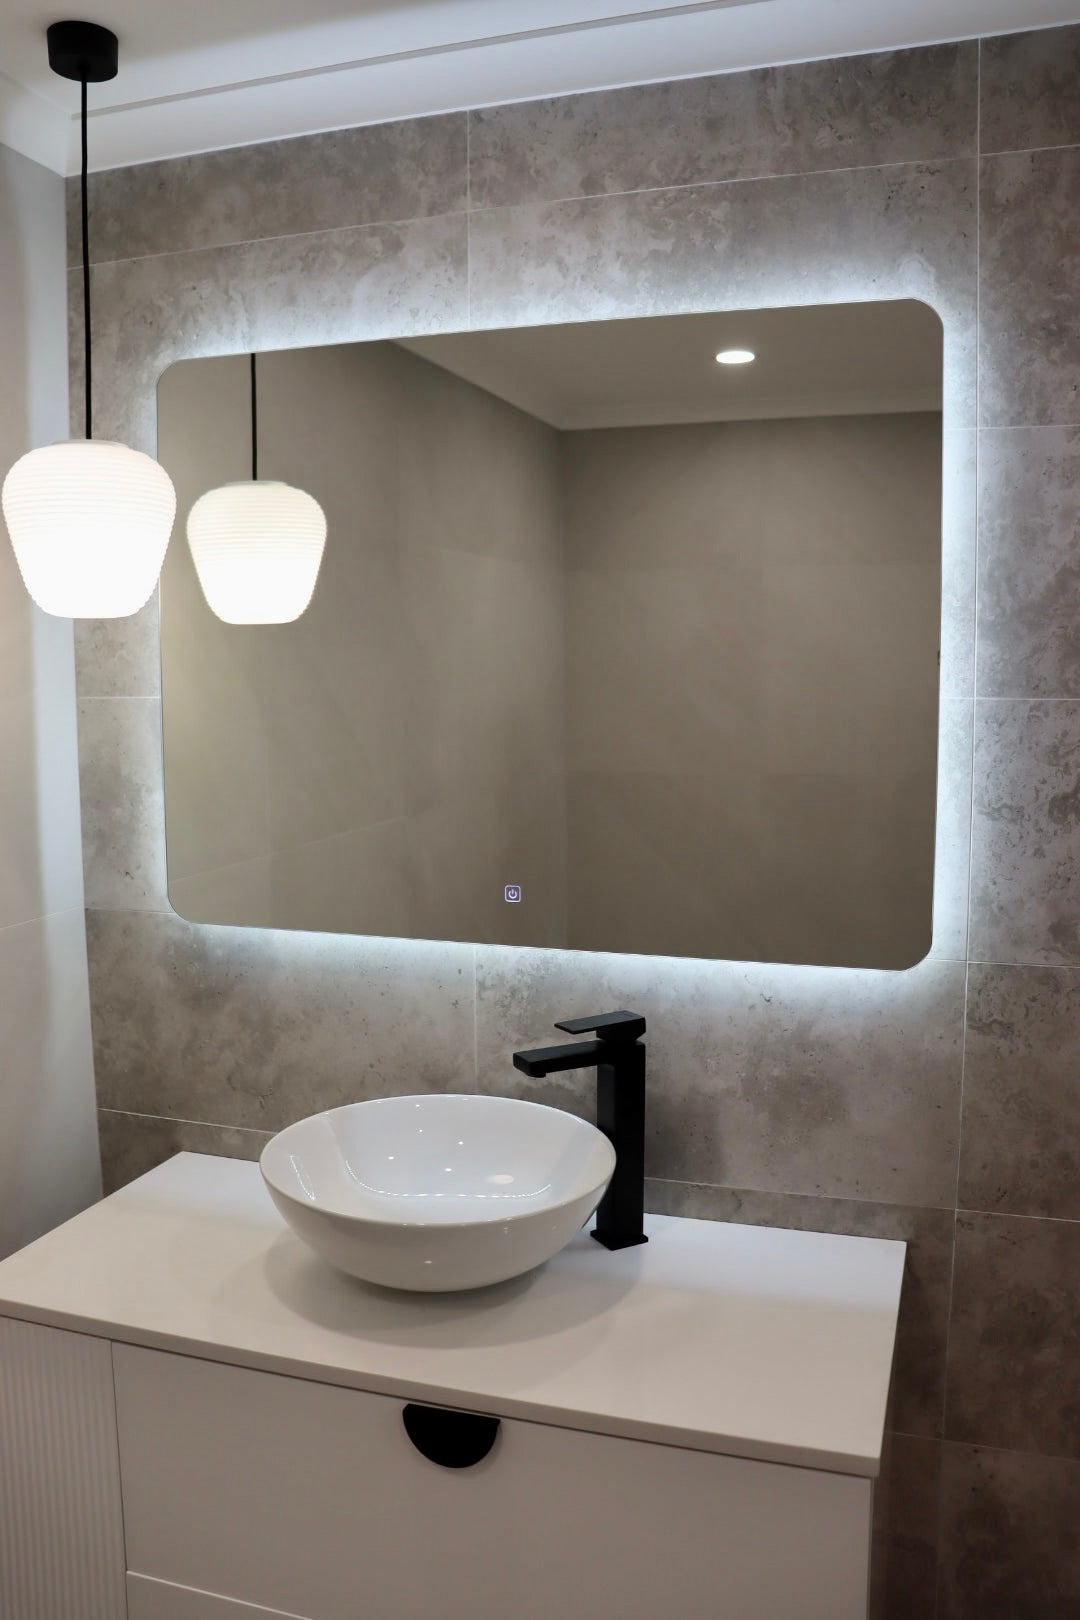 Right side angled view of a Well-lit vanity area from the Backlit LED mirror and pendant light